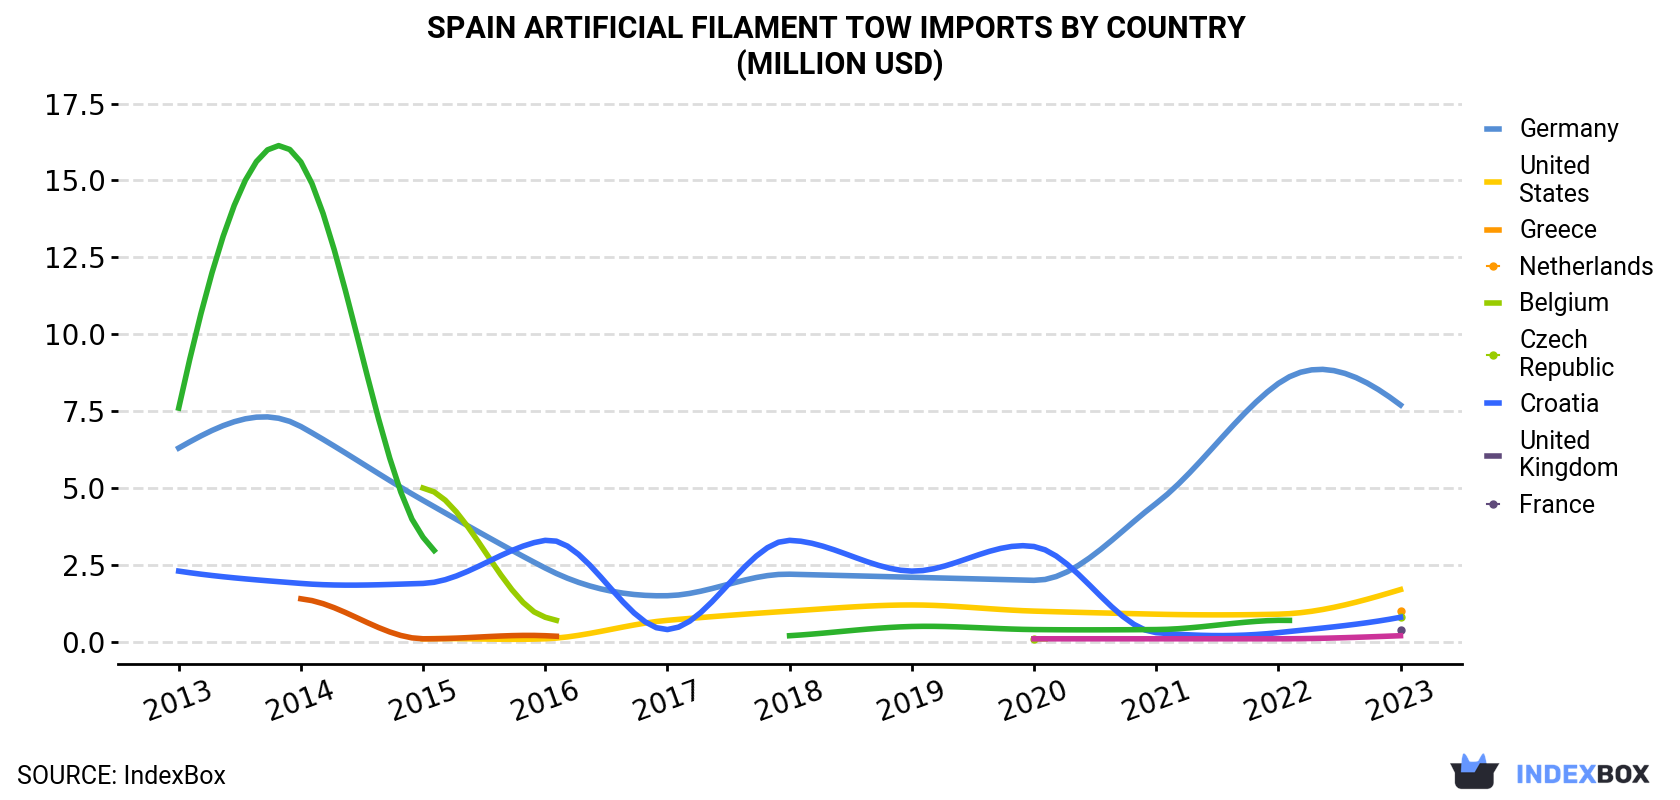 Spain Artificial Filament Tow Imports By Country (Million USD)